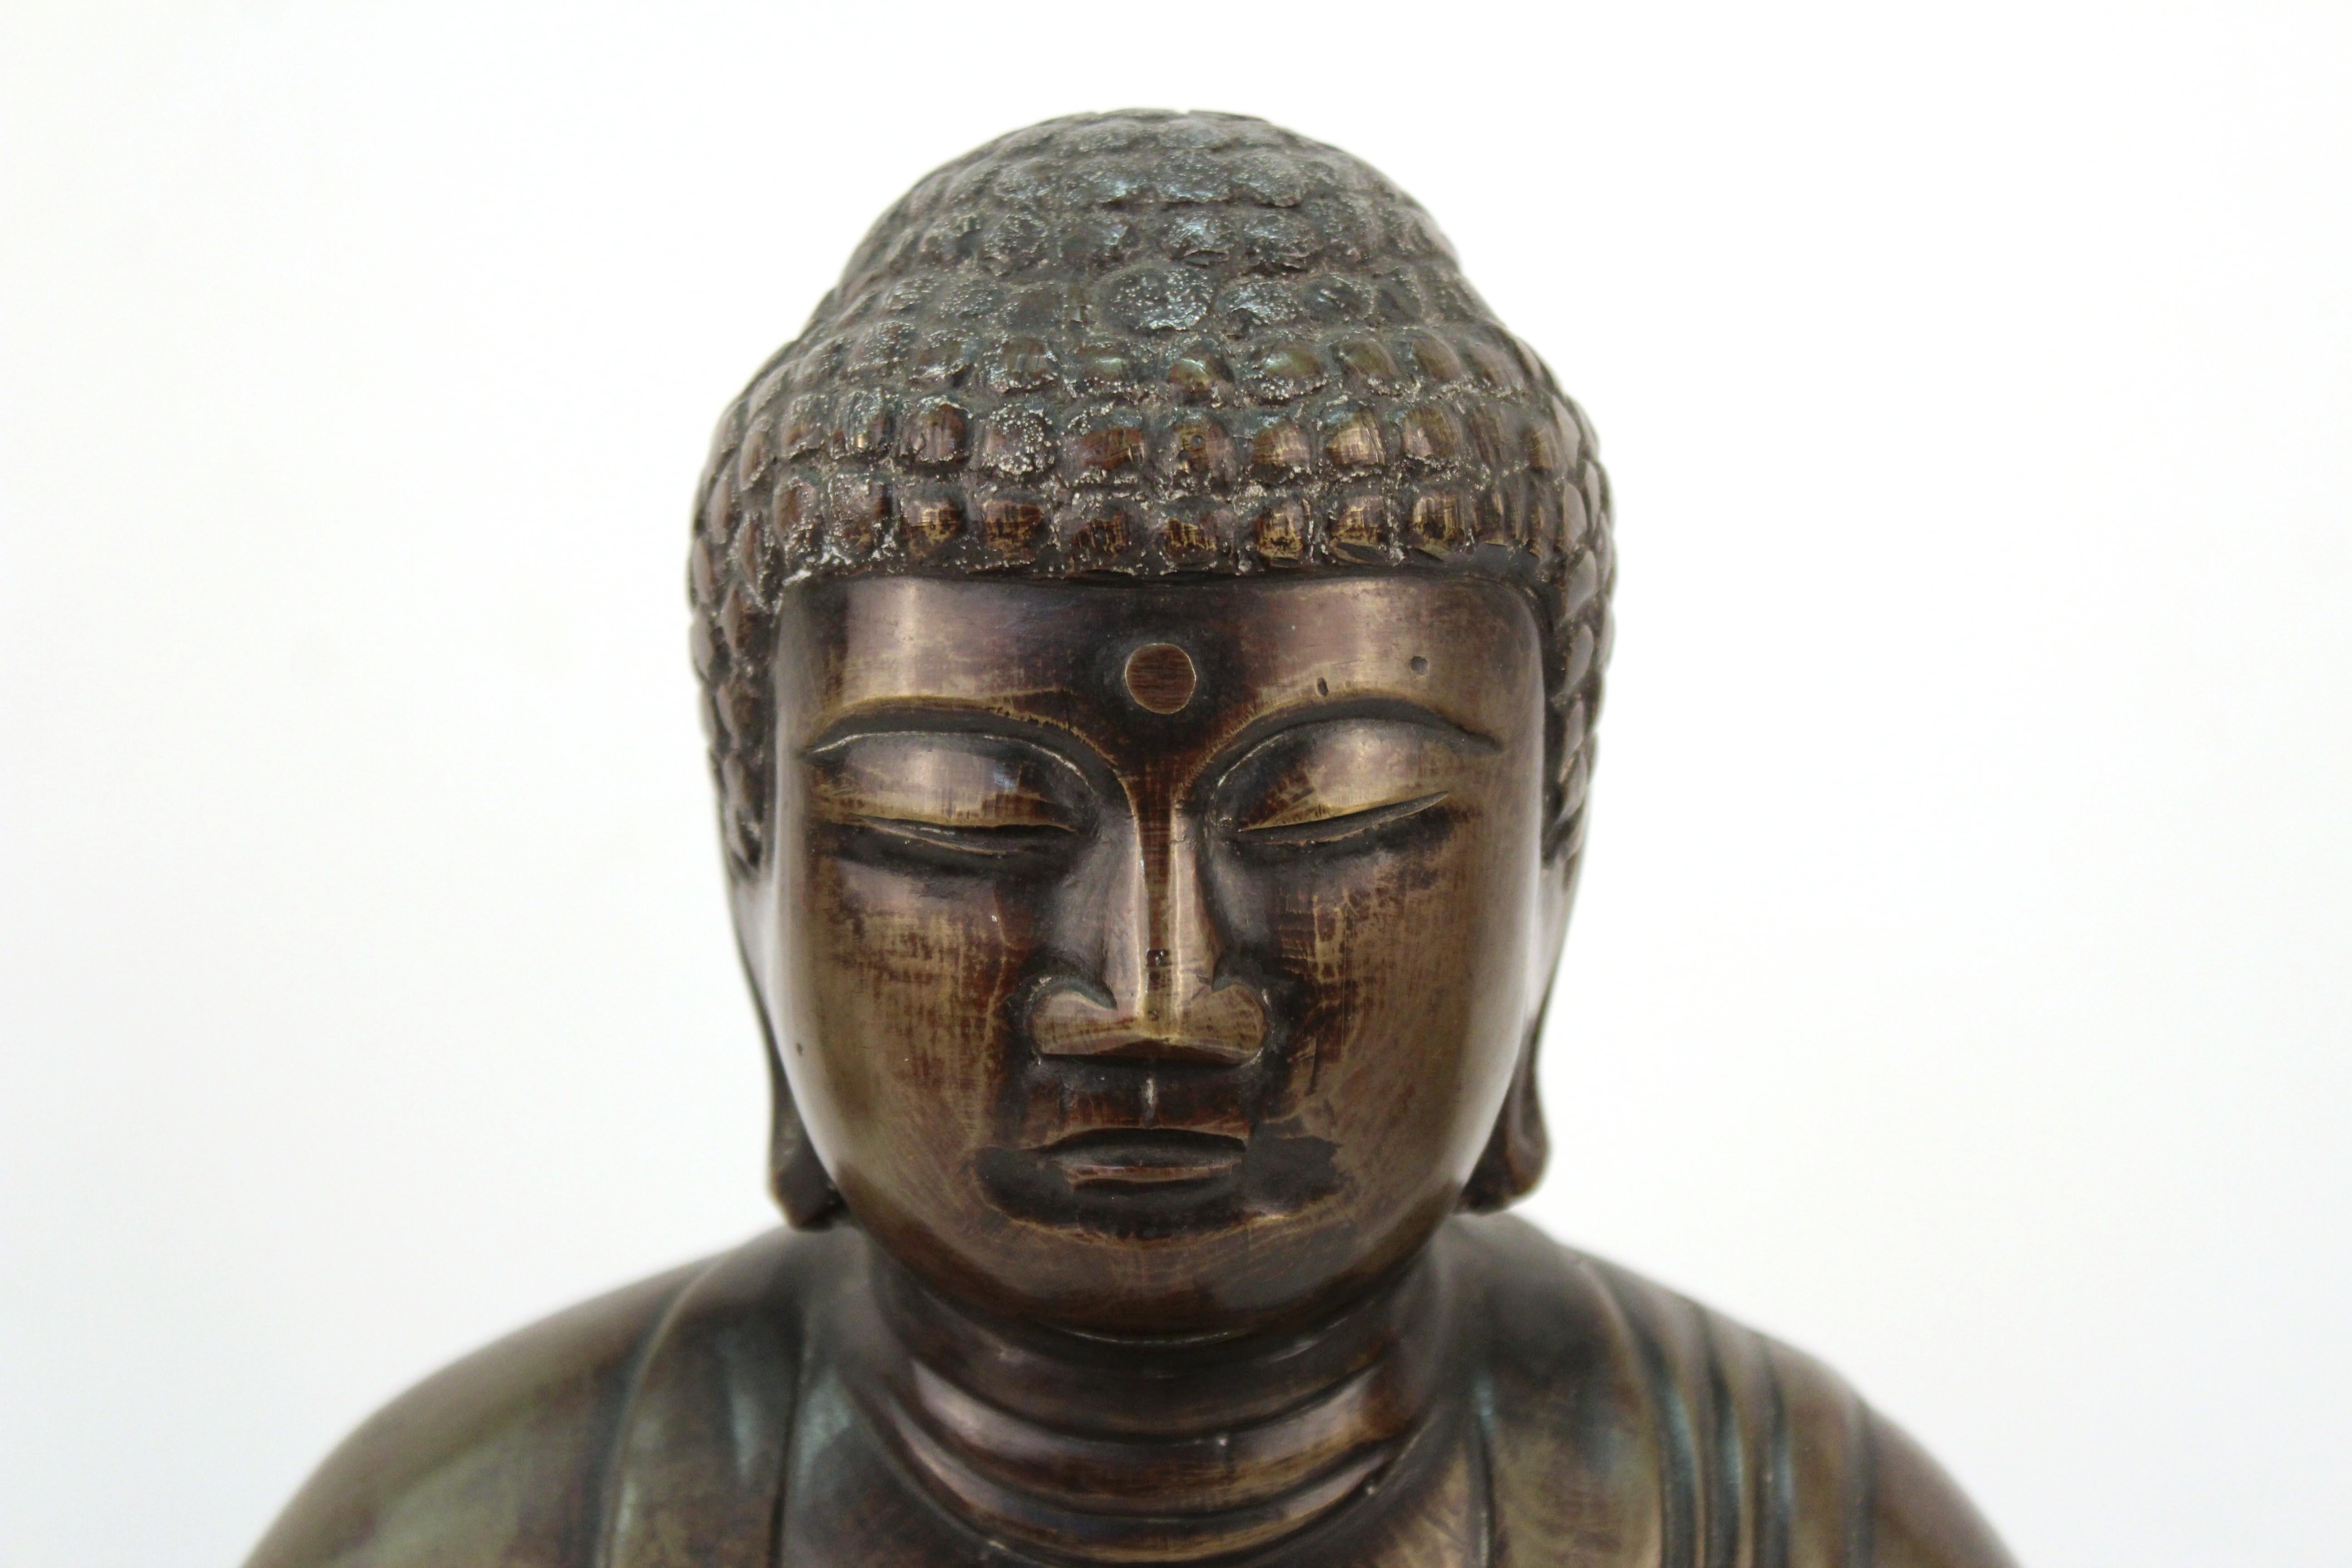 Japanese bronze sculpture of a Buddha in seated position. The piece was made during the mid-20th century. From a private collection in Vancouver. In great antique condition with age-appropriate wear and use.